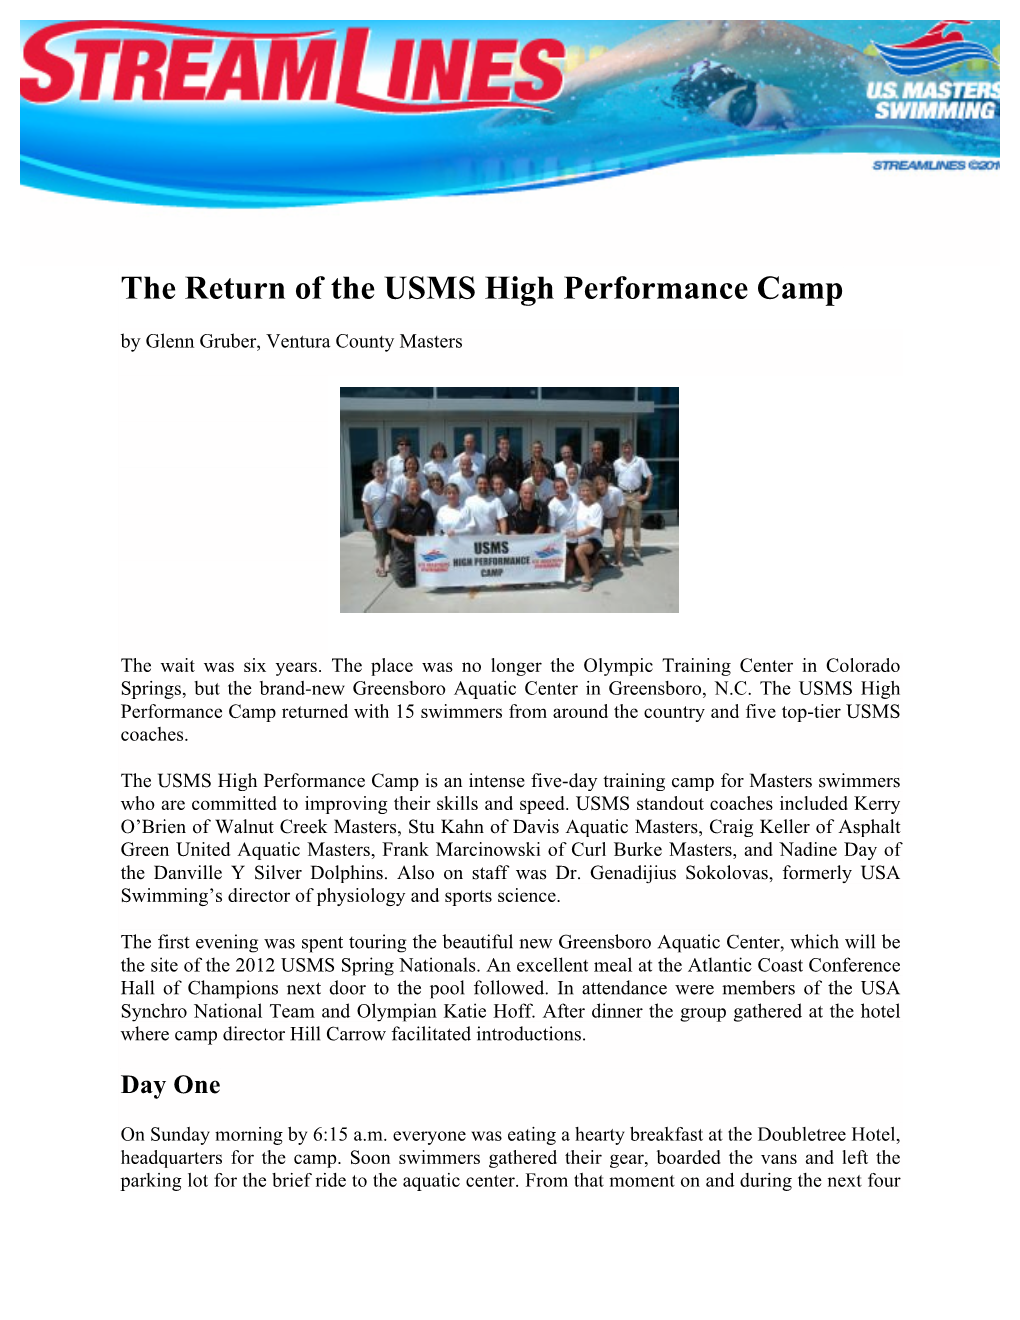 The Return of the USMS High Performance Camp by Glenn Gruber, Ventura County Masters